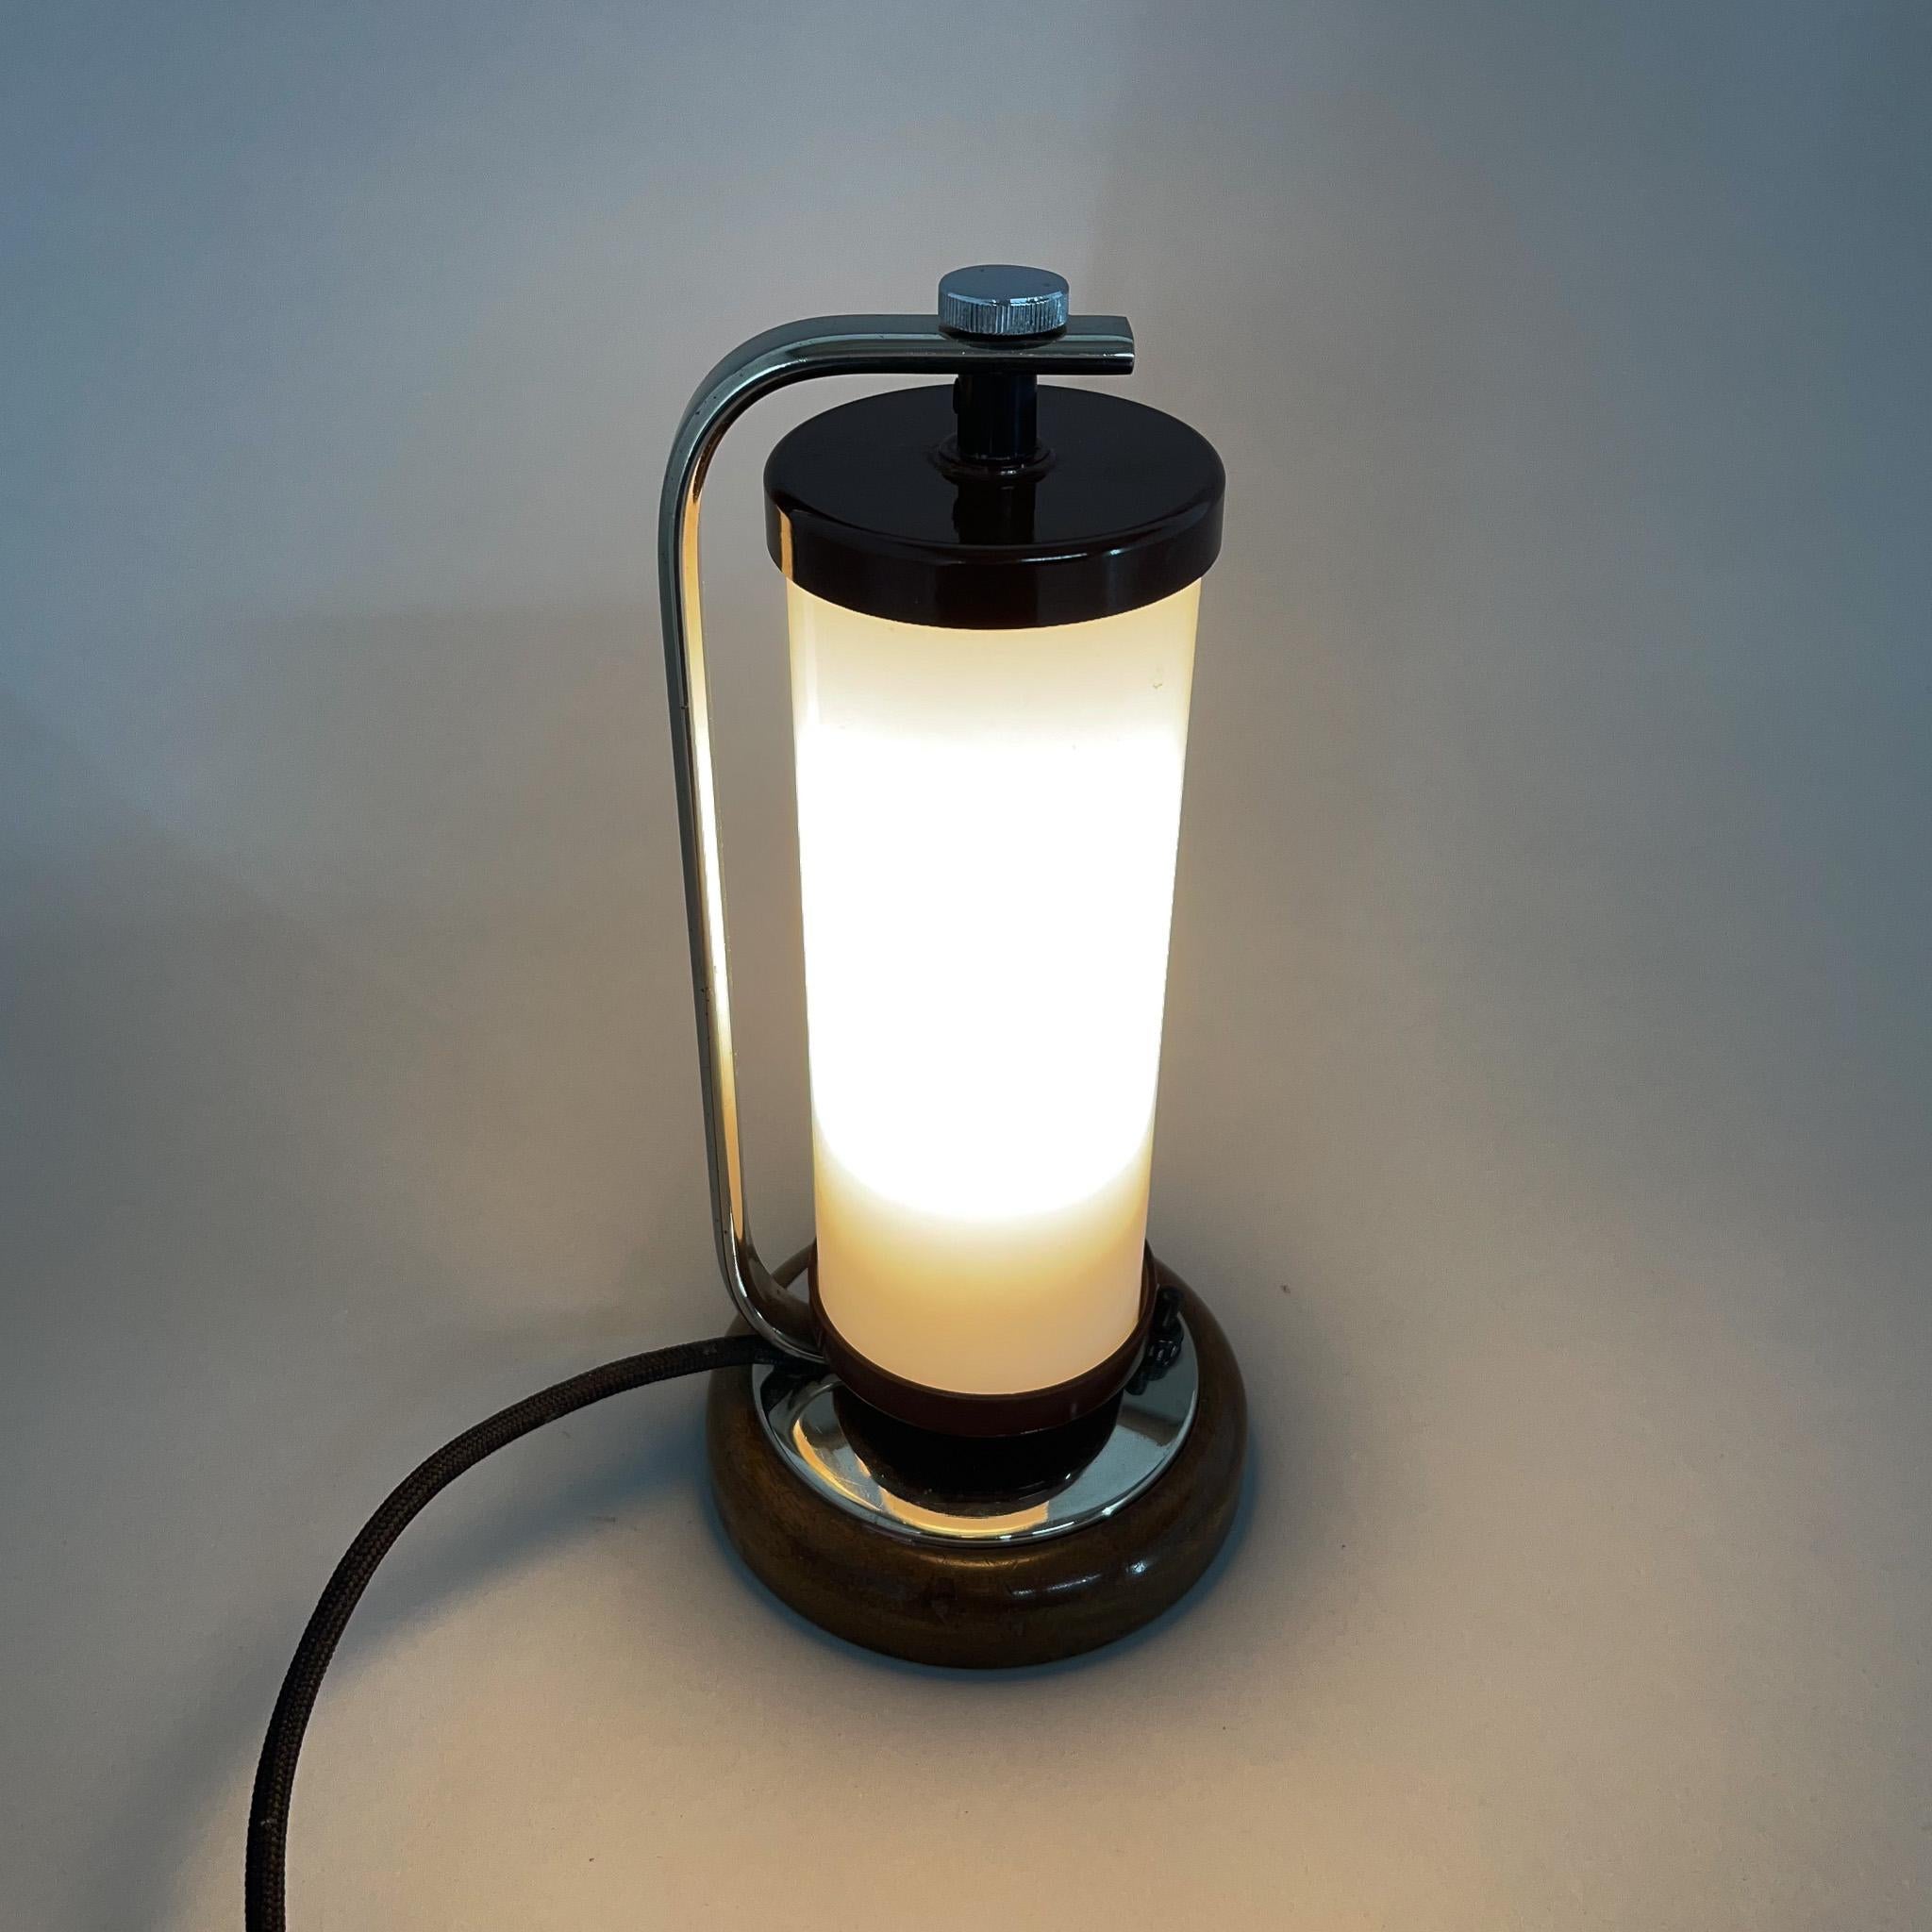 Tubular Table or Bedside Lamp with Wooden Base, 1930's For Sale 3